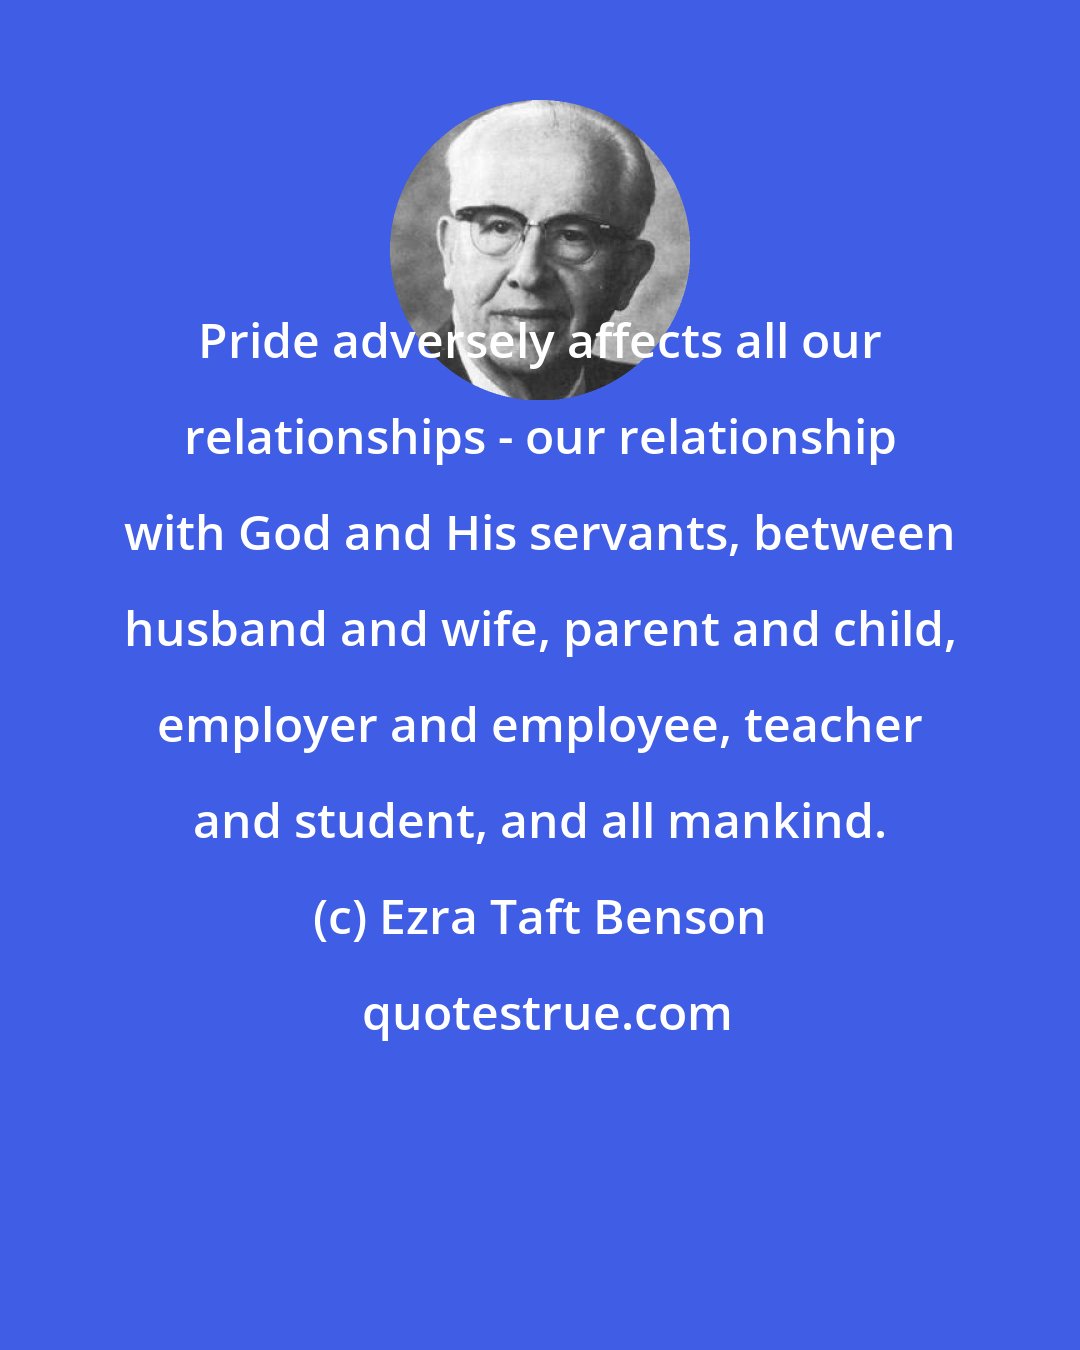 Ezra Taft Benson: Pride adversely affects all our relationships - our relationship with God and His servants, between husband and wife, parent and child, employer and employee, teacher and student, and all mankind.